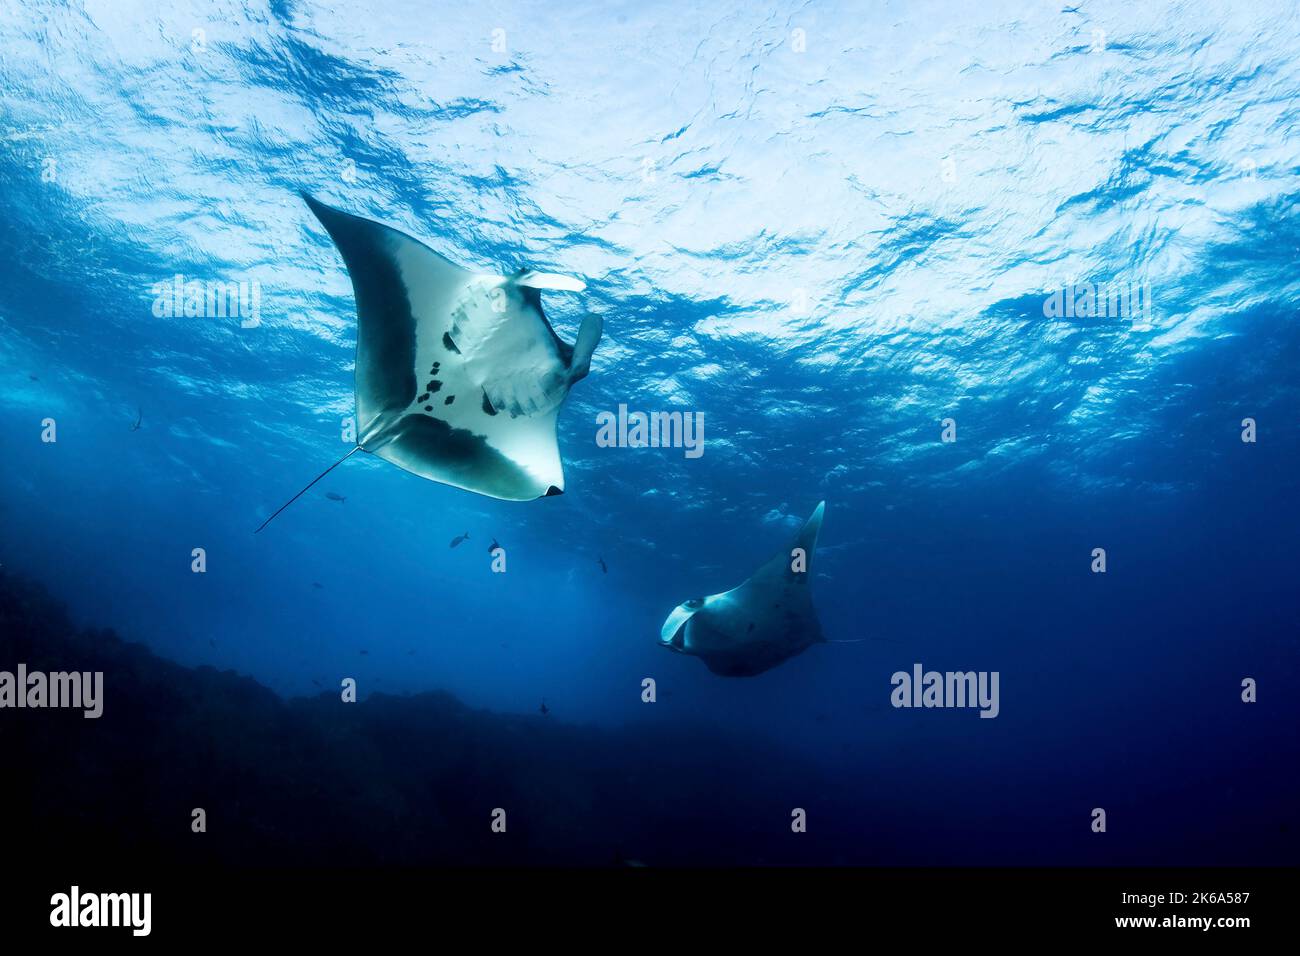 Two manta rays play in the waves at the surface of the ocean, Socorro Island, Mexico. Stock Photo